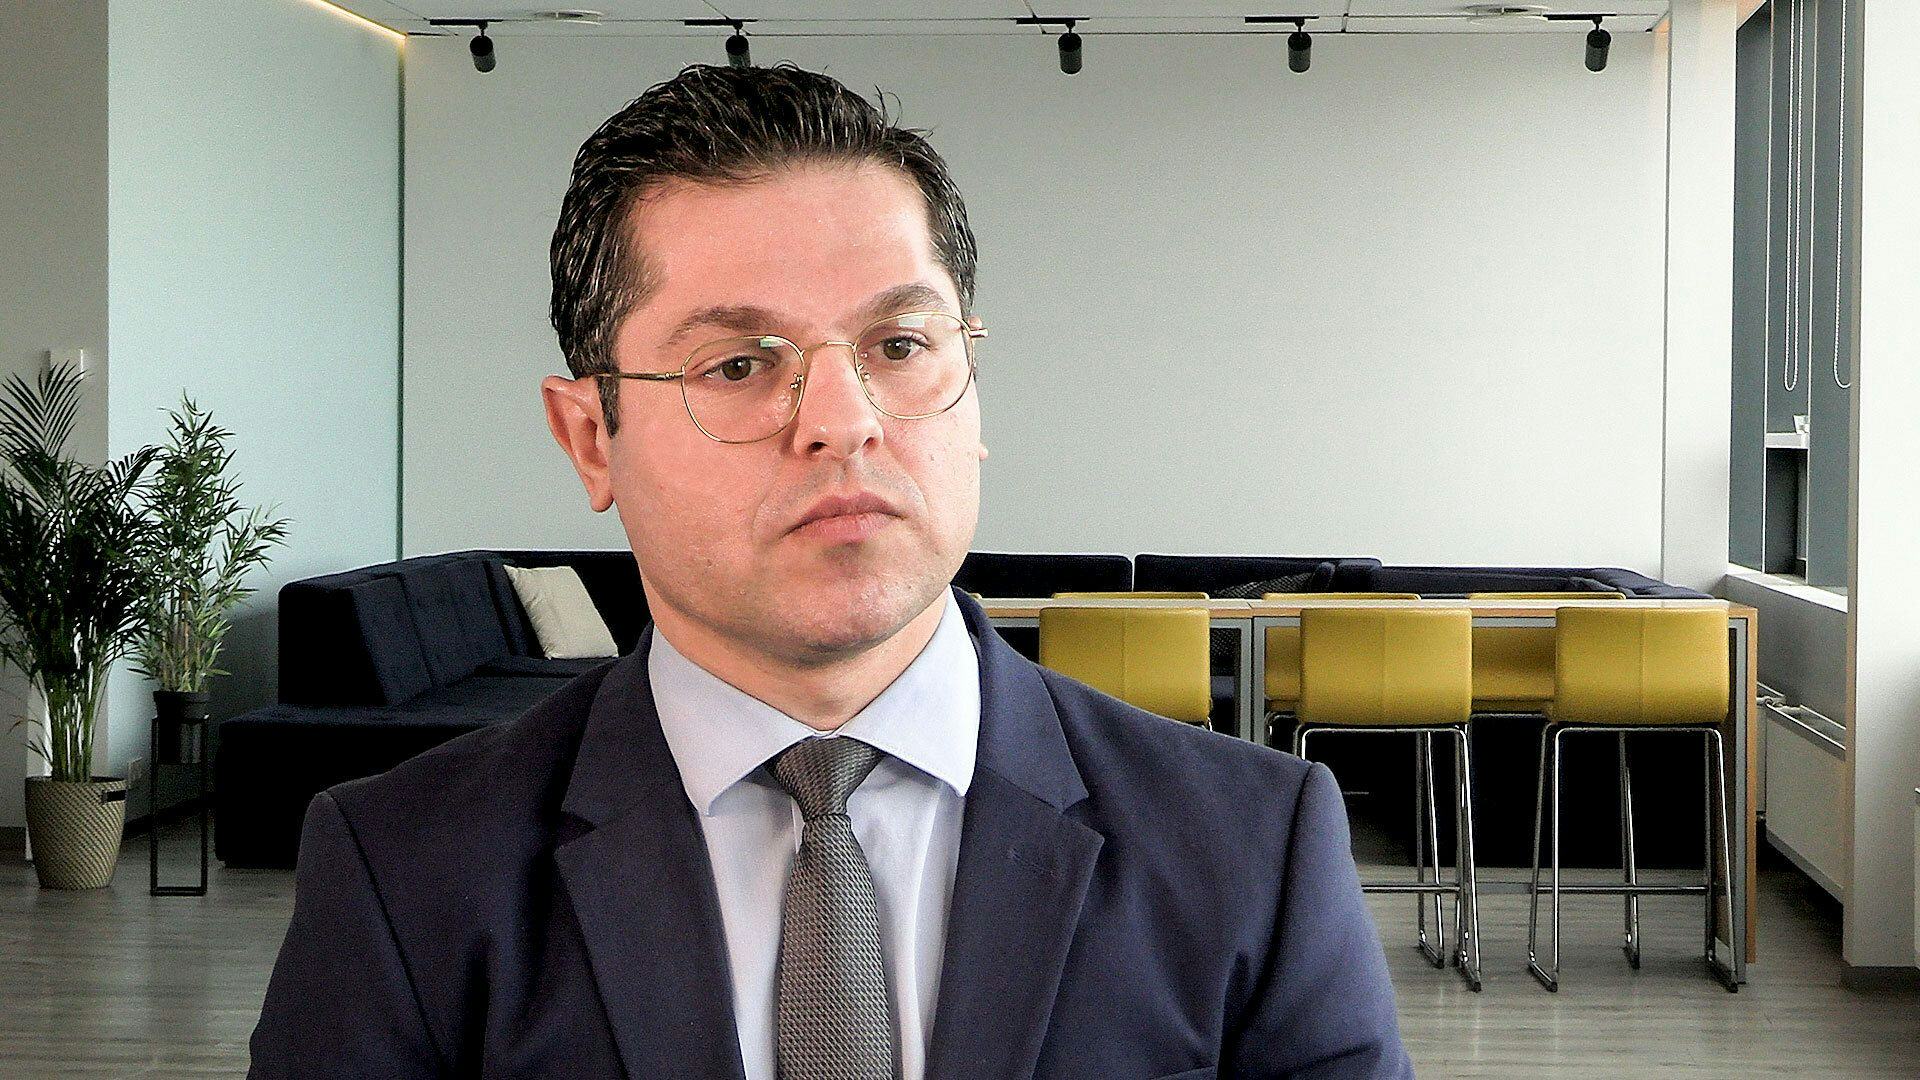 A man in a suit and glasses set against an office background with modern furniture